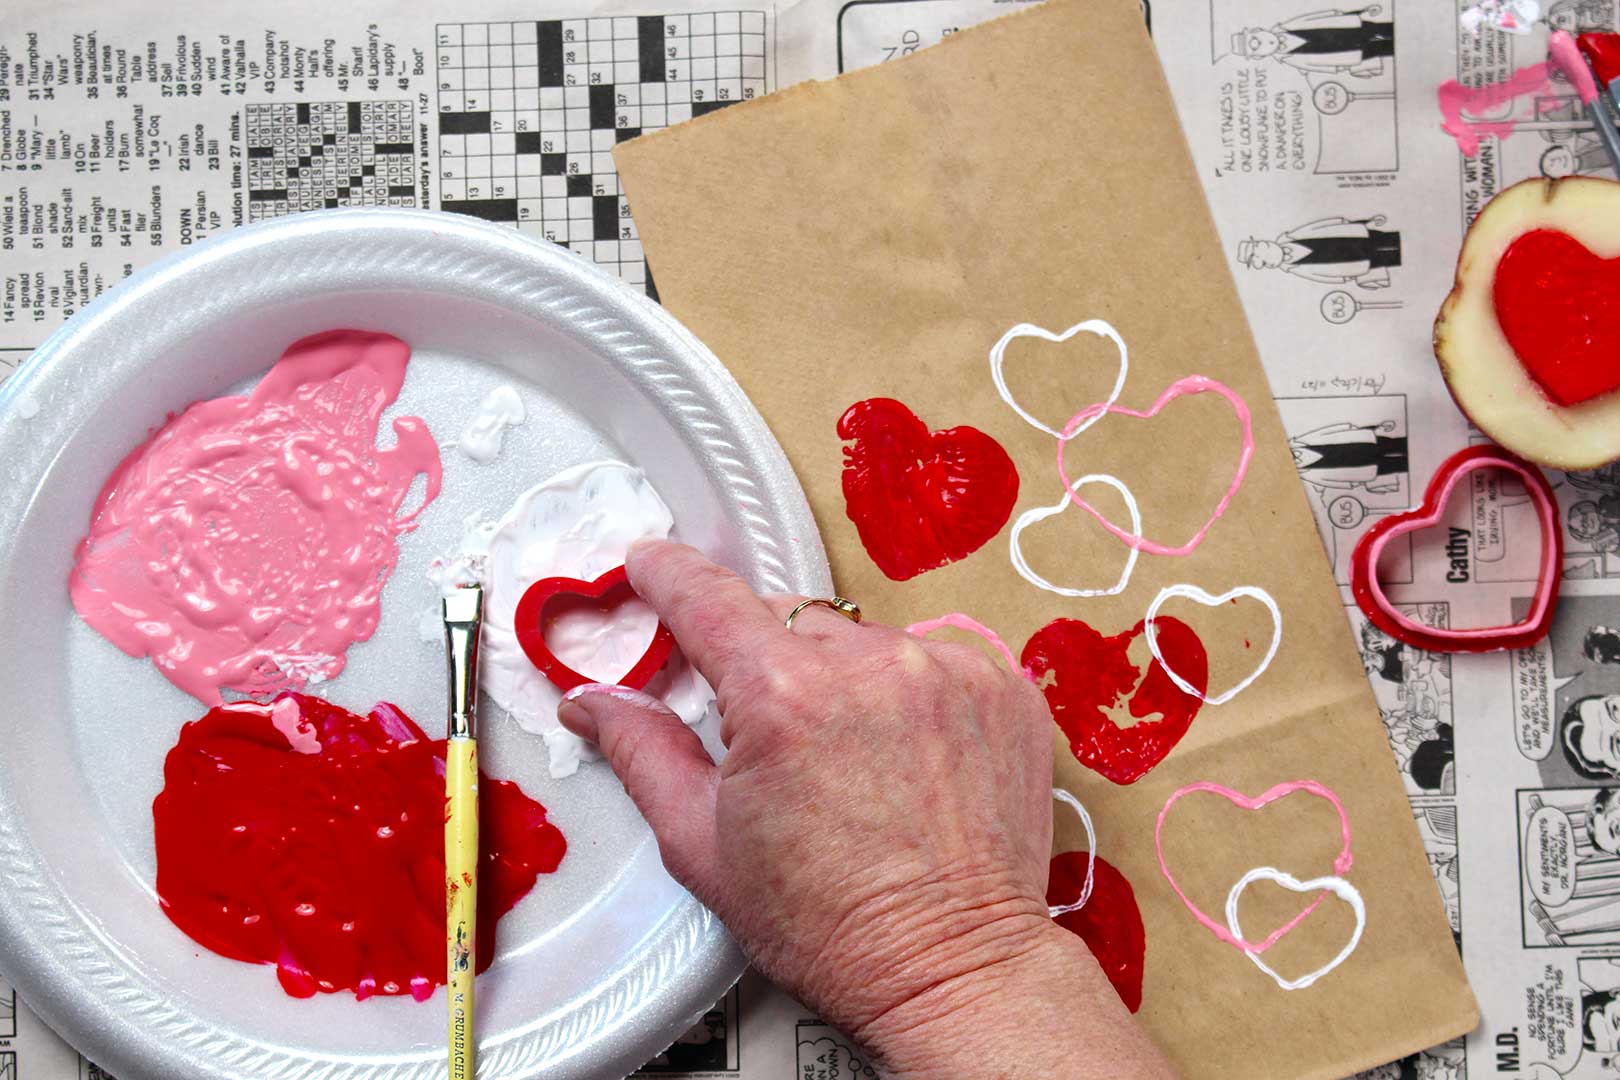 Hand dipping red cookie cutter in white paint near brown paper bag with painted heart stamps resting on newsprint.